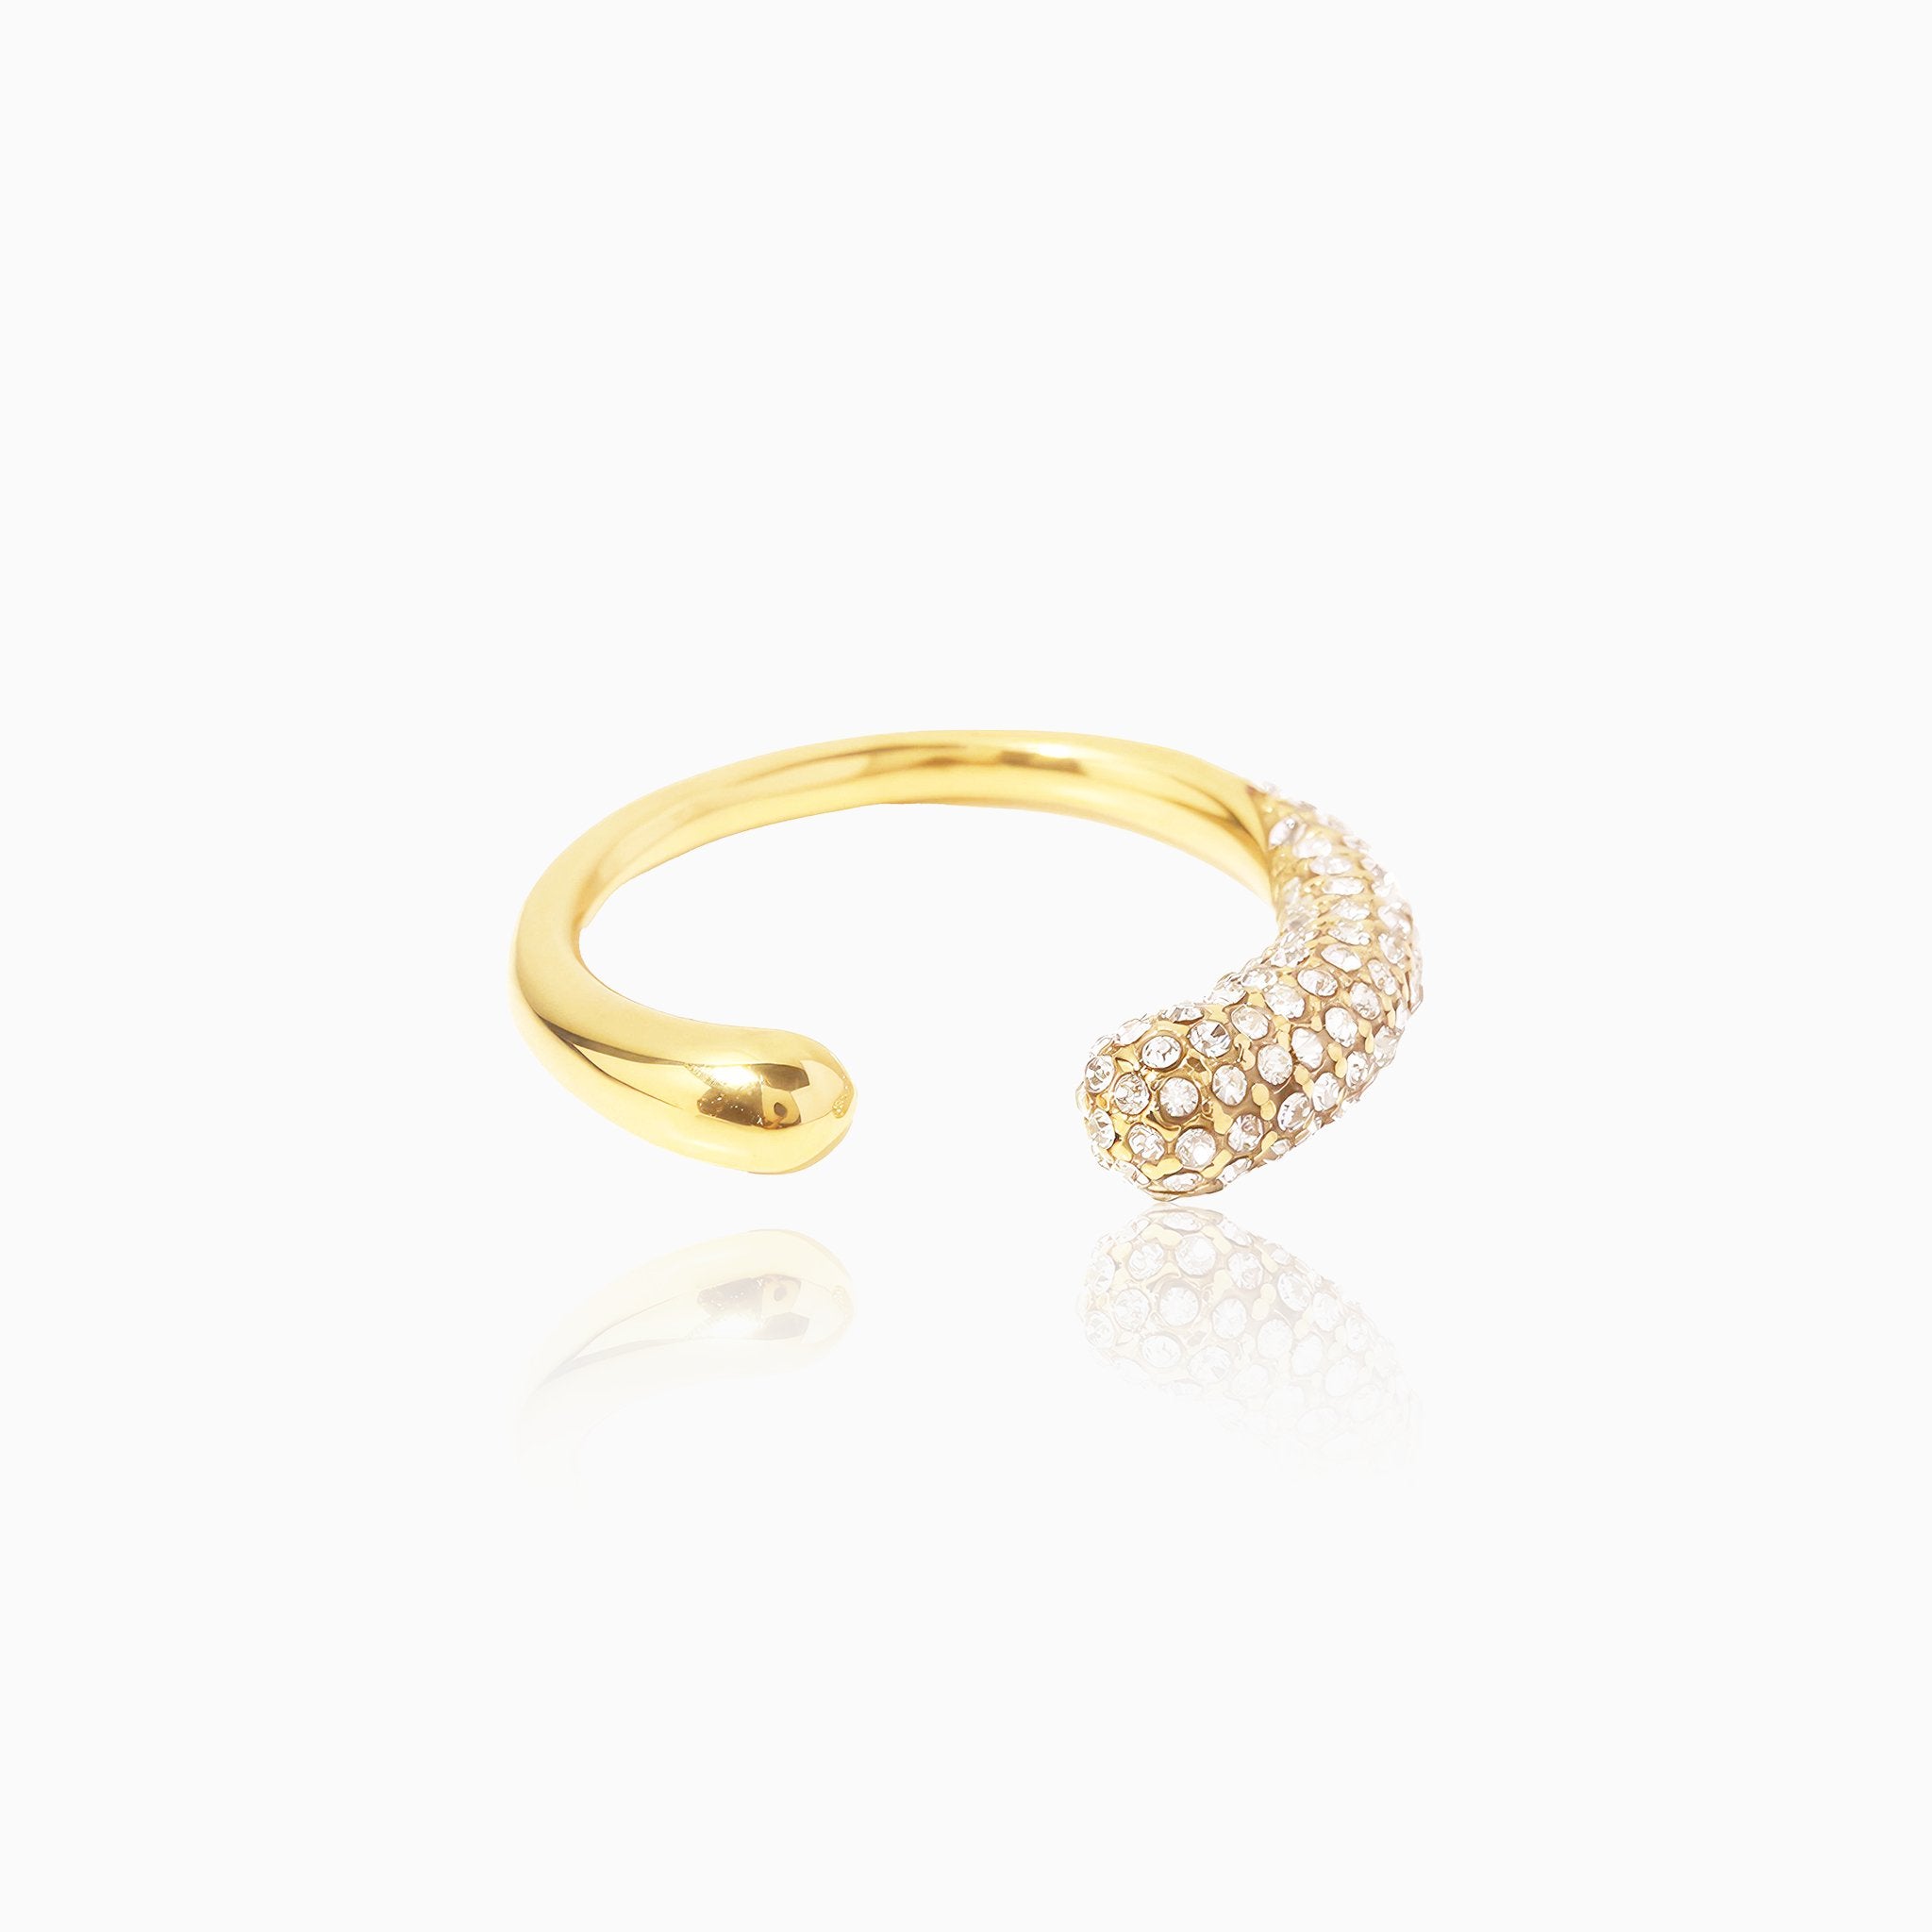 Open Ring with Sparkling White Gemstones - Nobbier - Ring - 18K Gold And Titanium PVD Coated Jewelry